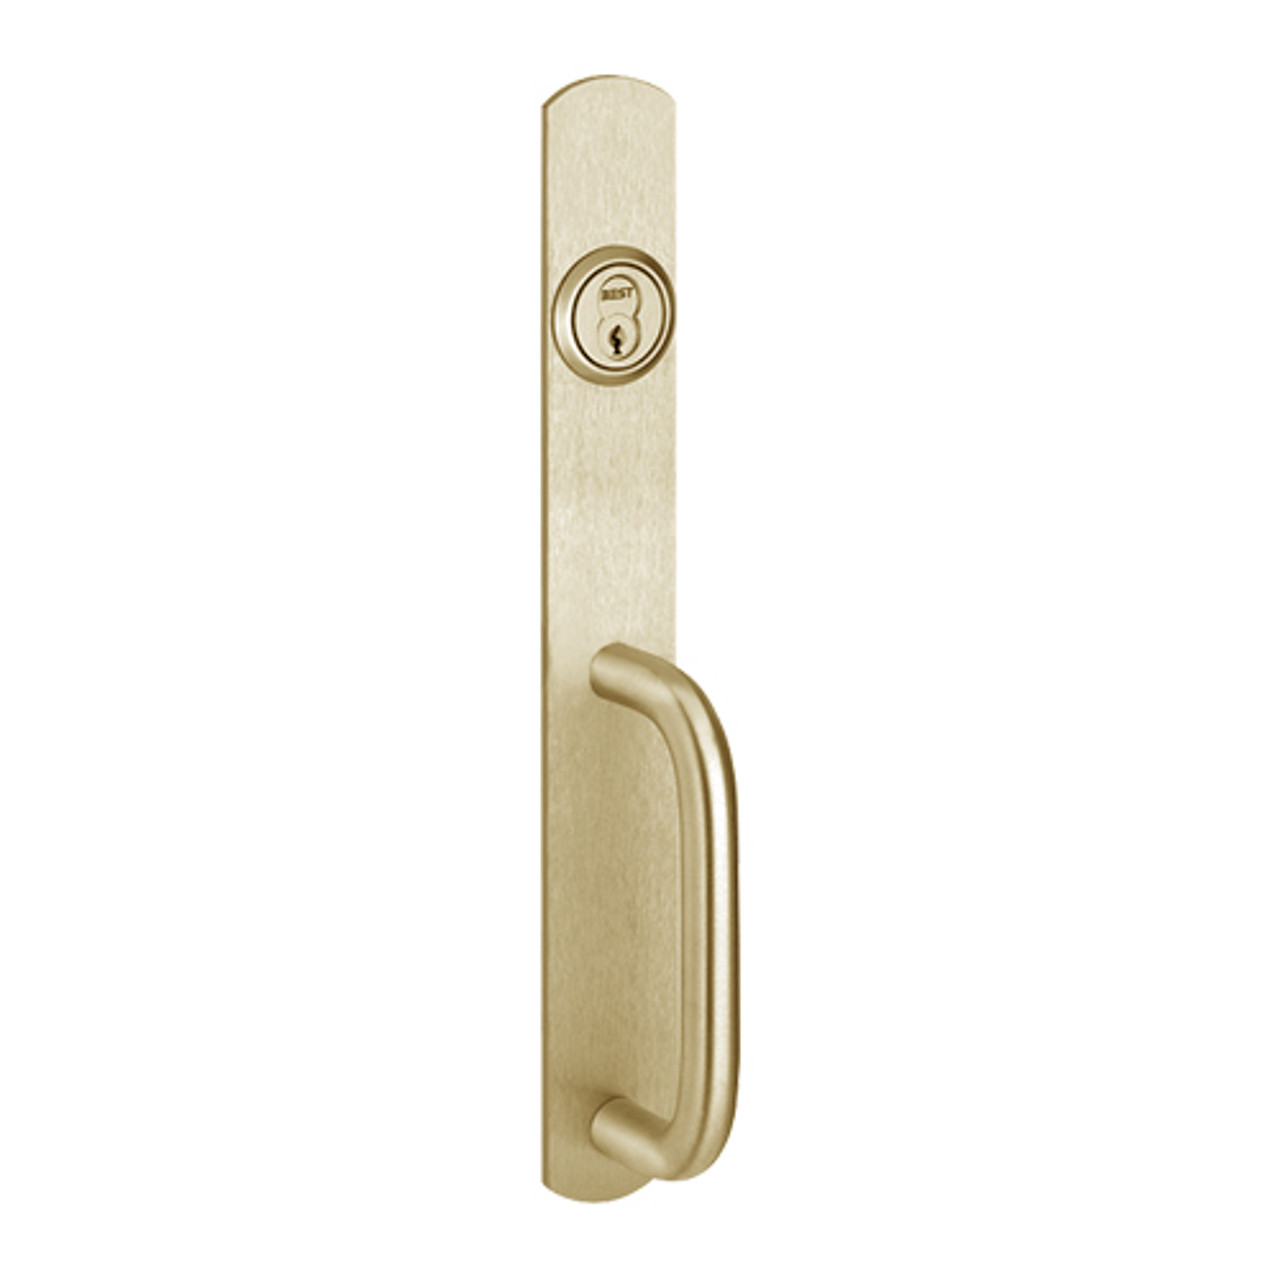 2003C-606 PHI Key Retracts Latchbolt Trim with C Design Pull for Apex Narrow Stile Device in Satin Brass Finish